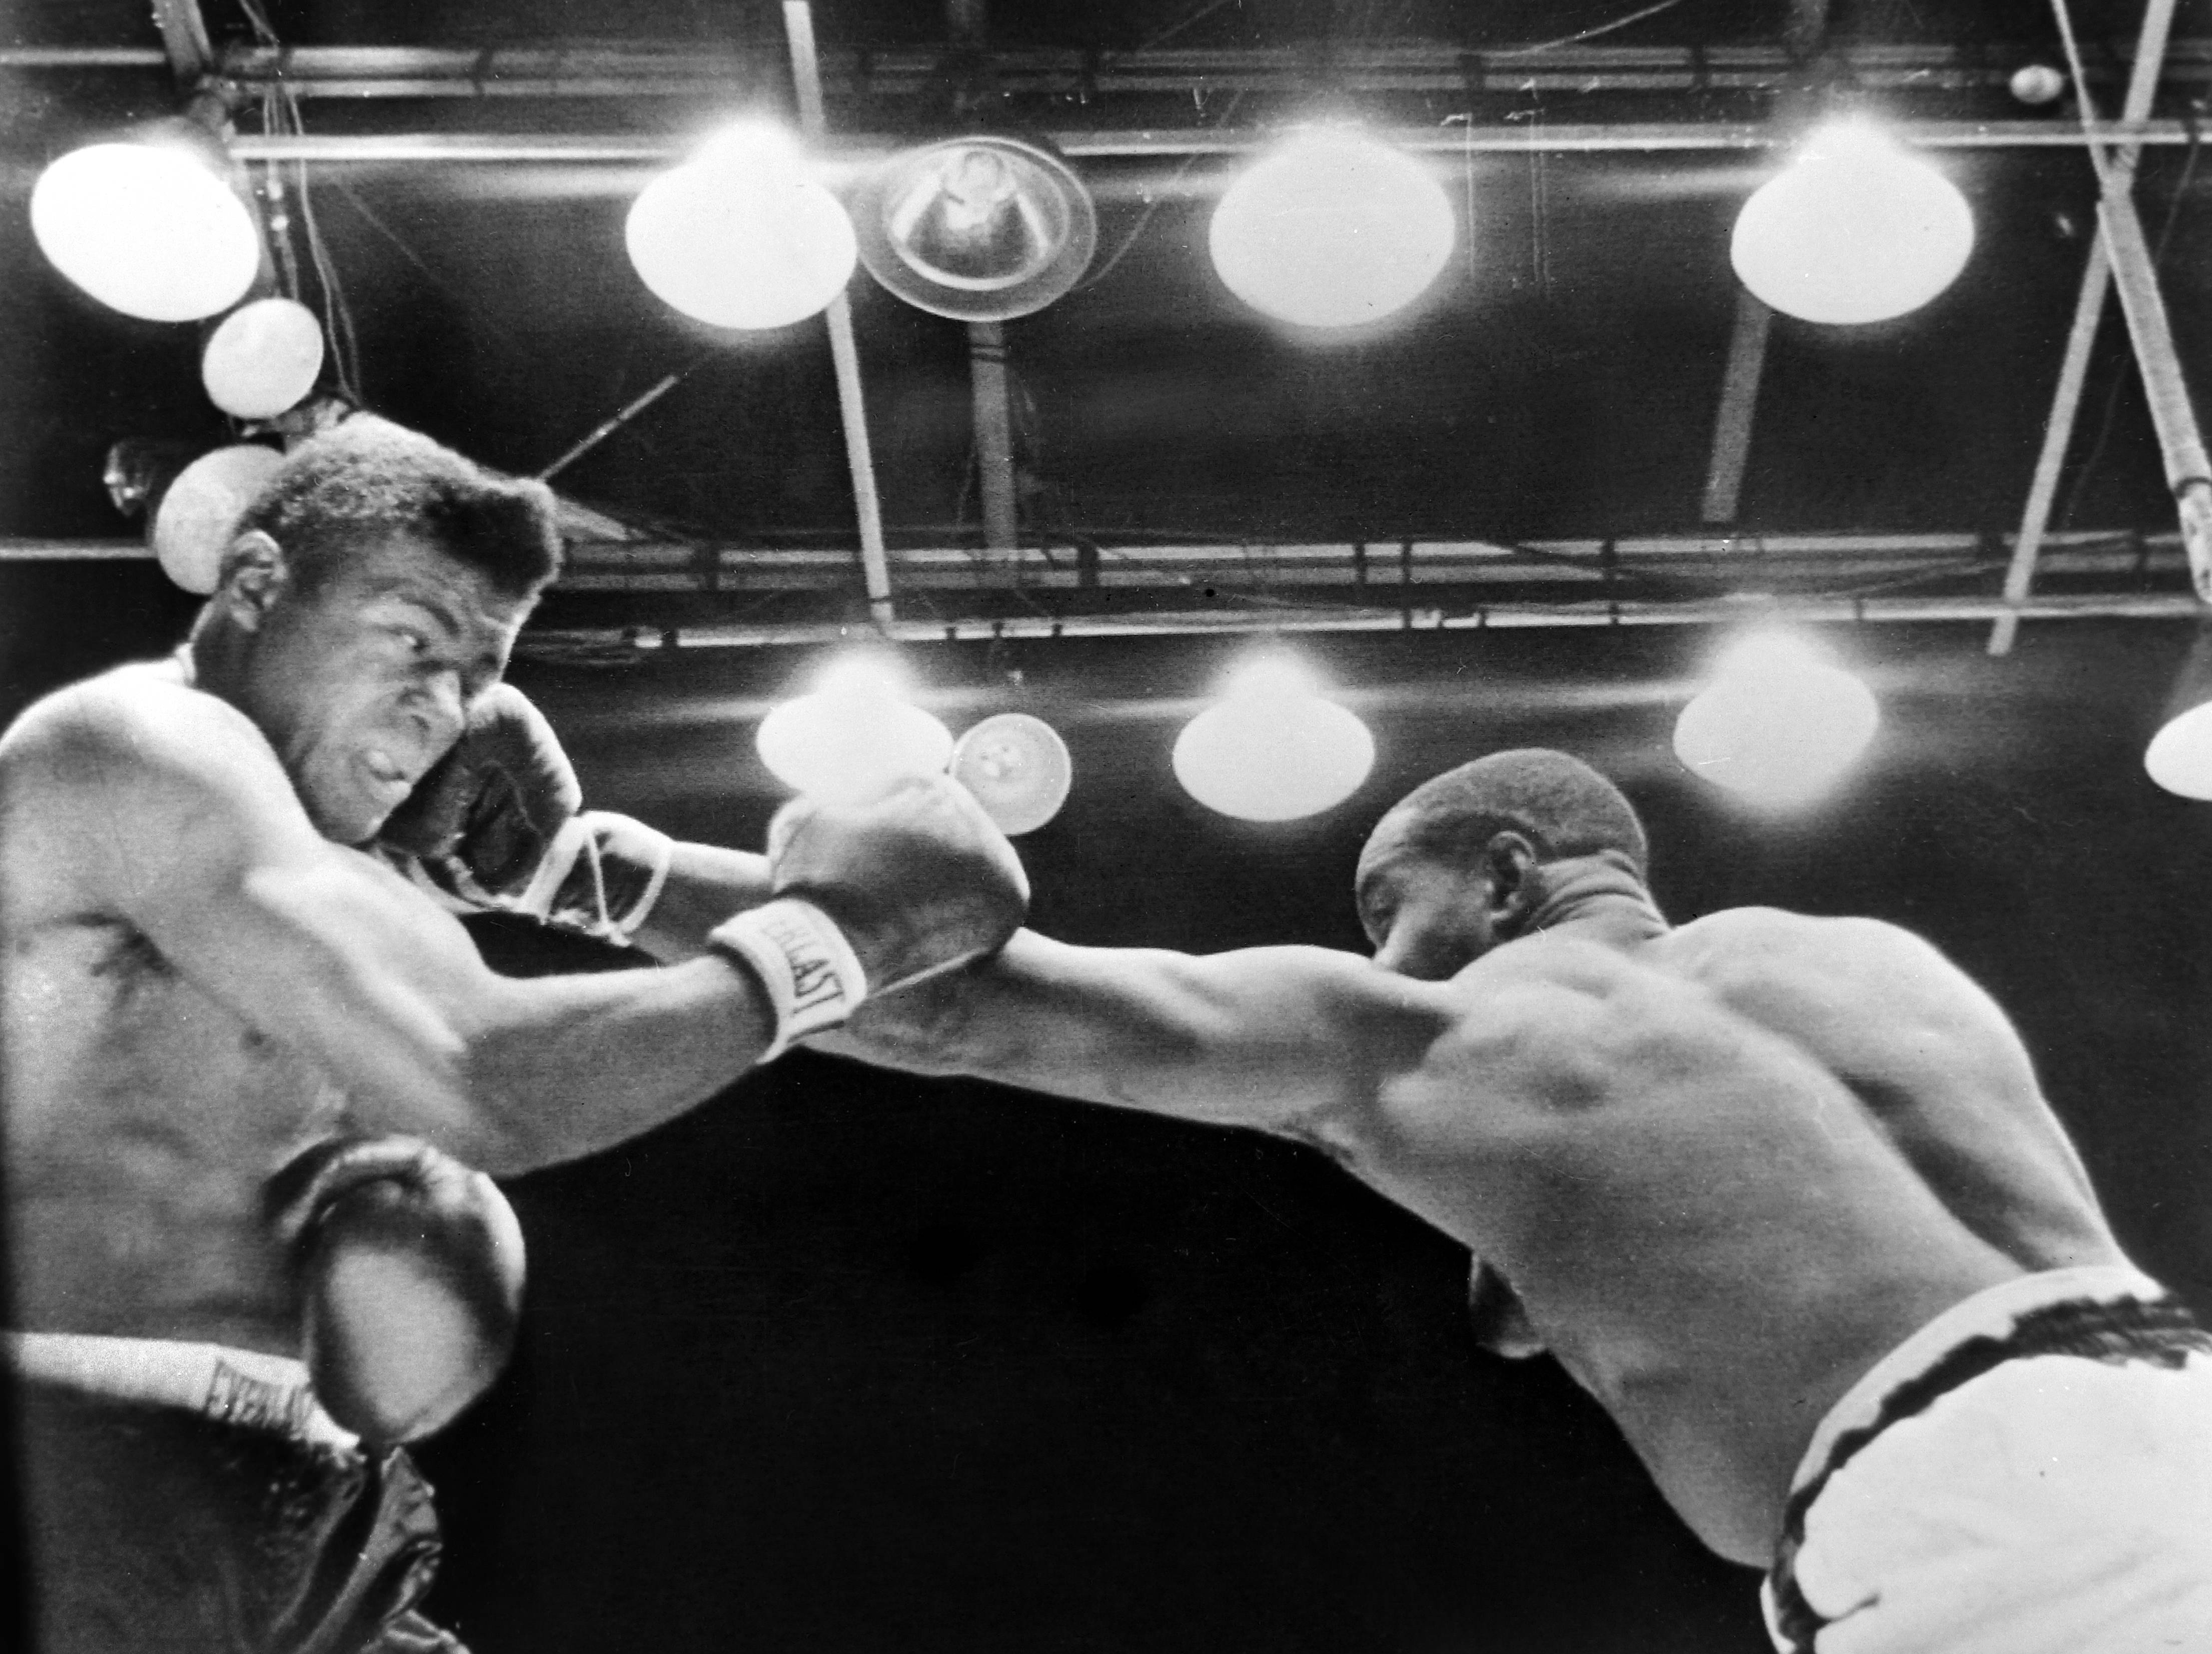 26 SEPTEMBER 1962 SONNY LISTON KNOCKS OUT WORLD HEAVYWEIGHT TITLE HOLDER FLOYD PATTERSON IN 2 MINUTES AND 6 SECONDS TO BECOME THE NEW CHAMPION. COMISKEY PARK, CHICAGO, ILLINOIS, USA.